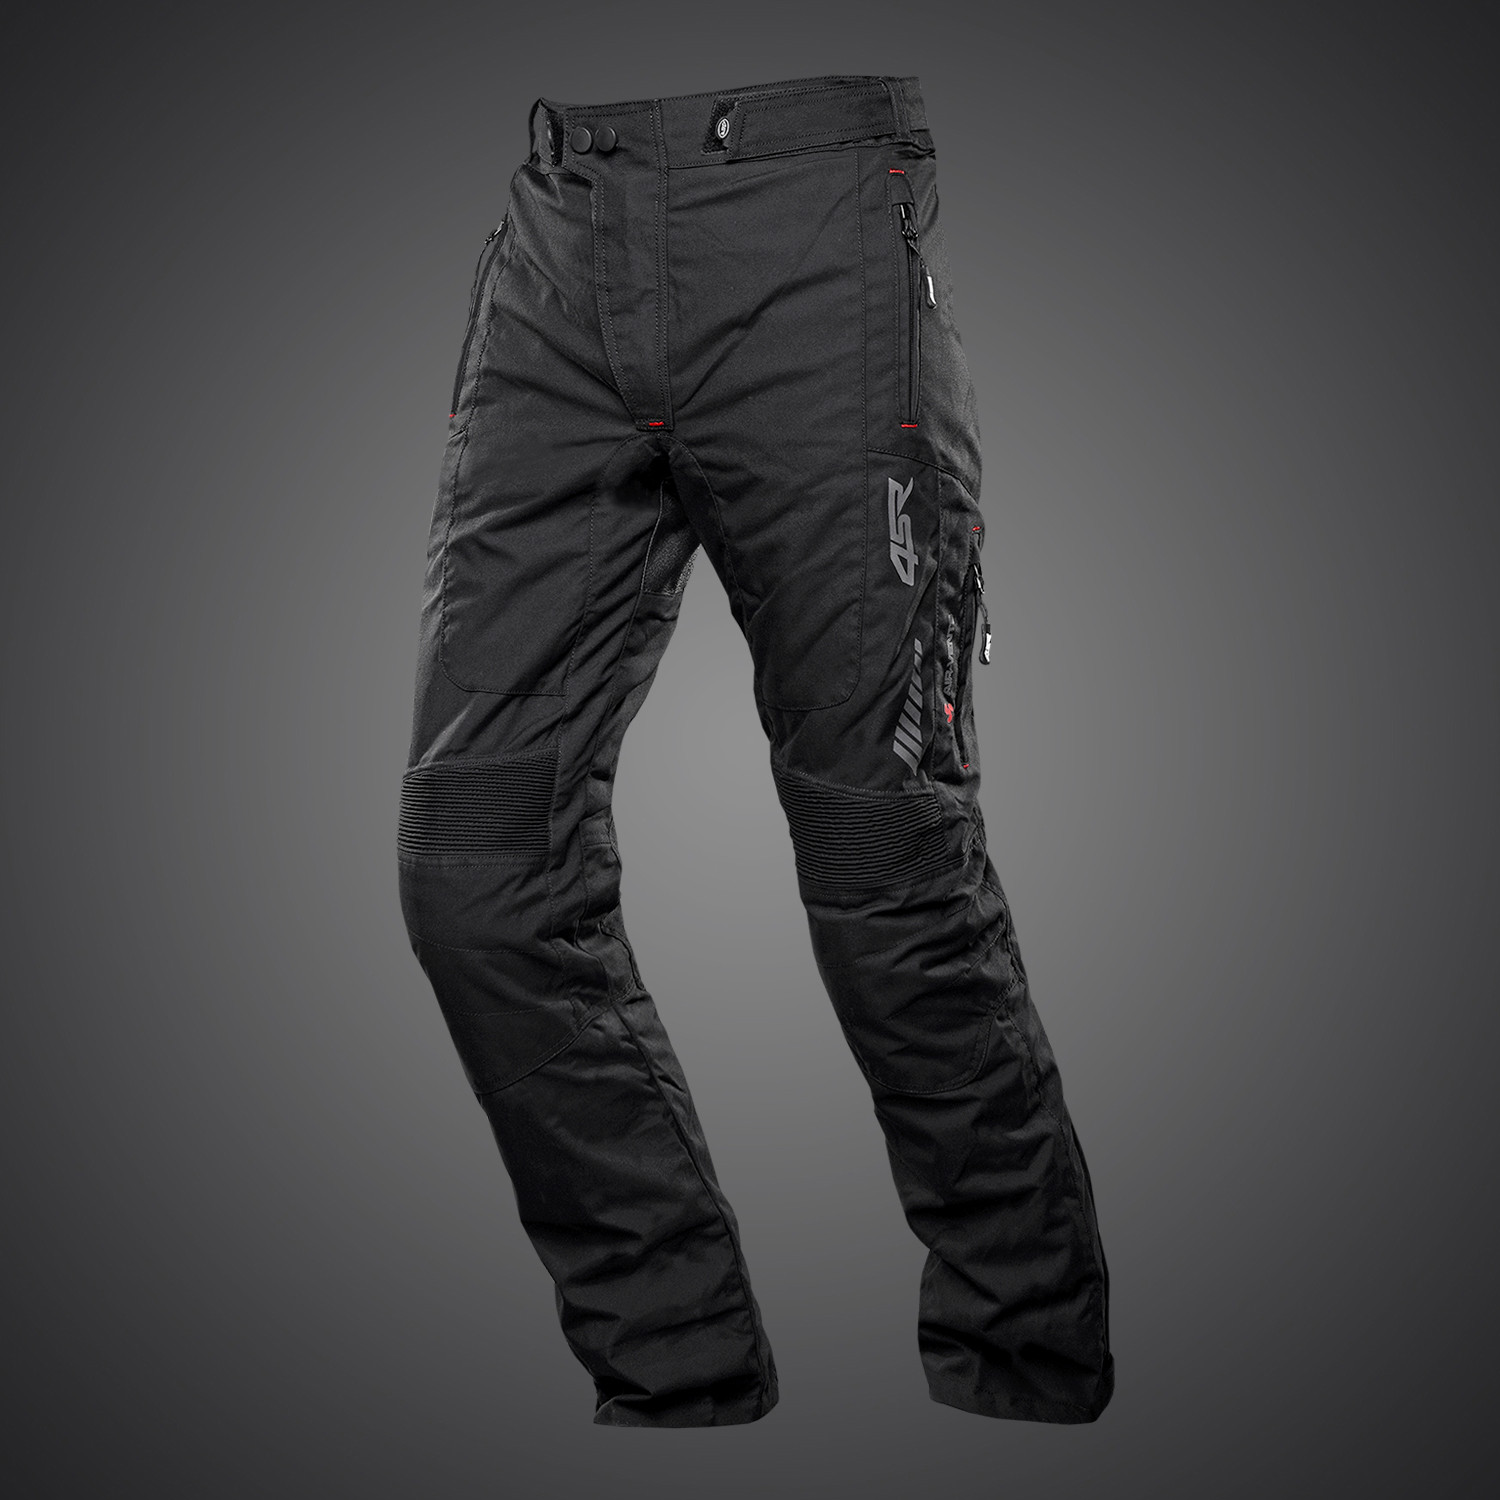 Womens motorcycle pants  Find your perfect Leather and Textile Motorcycle  Pants for Ladies